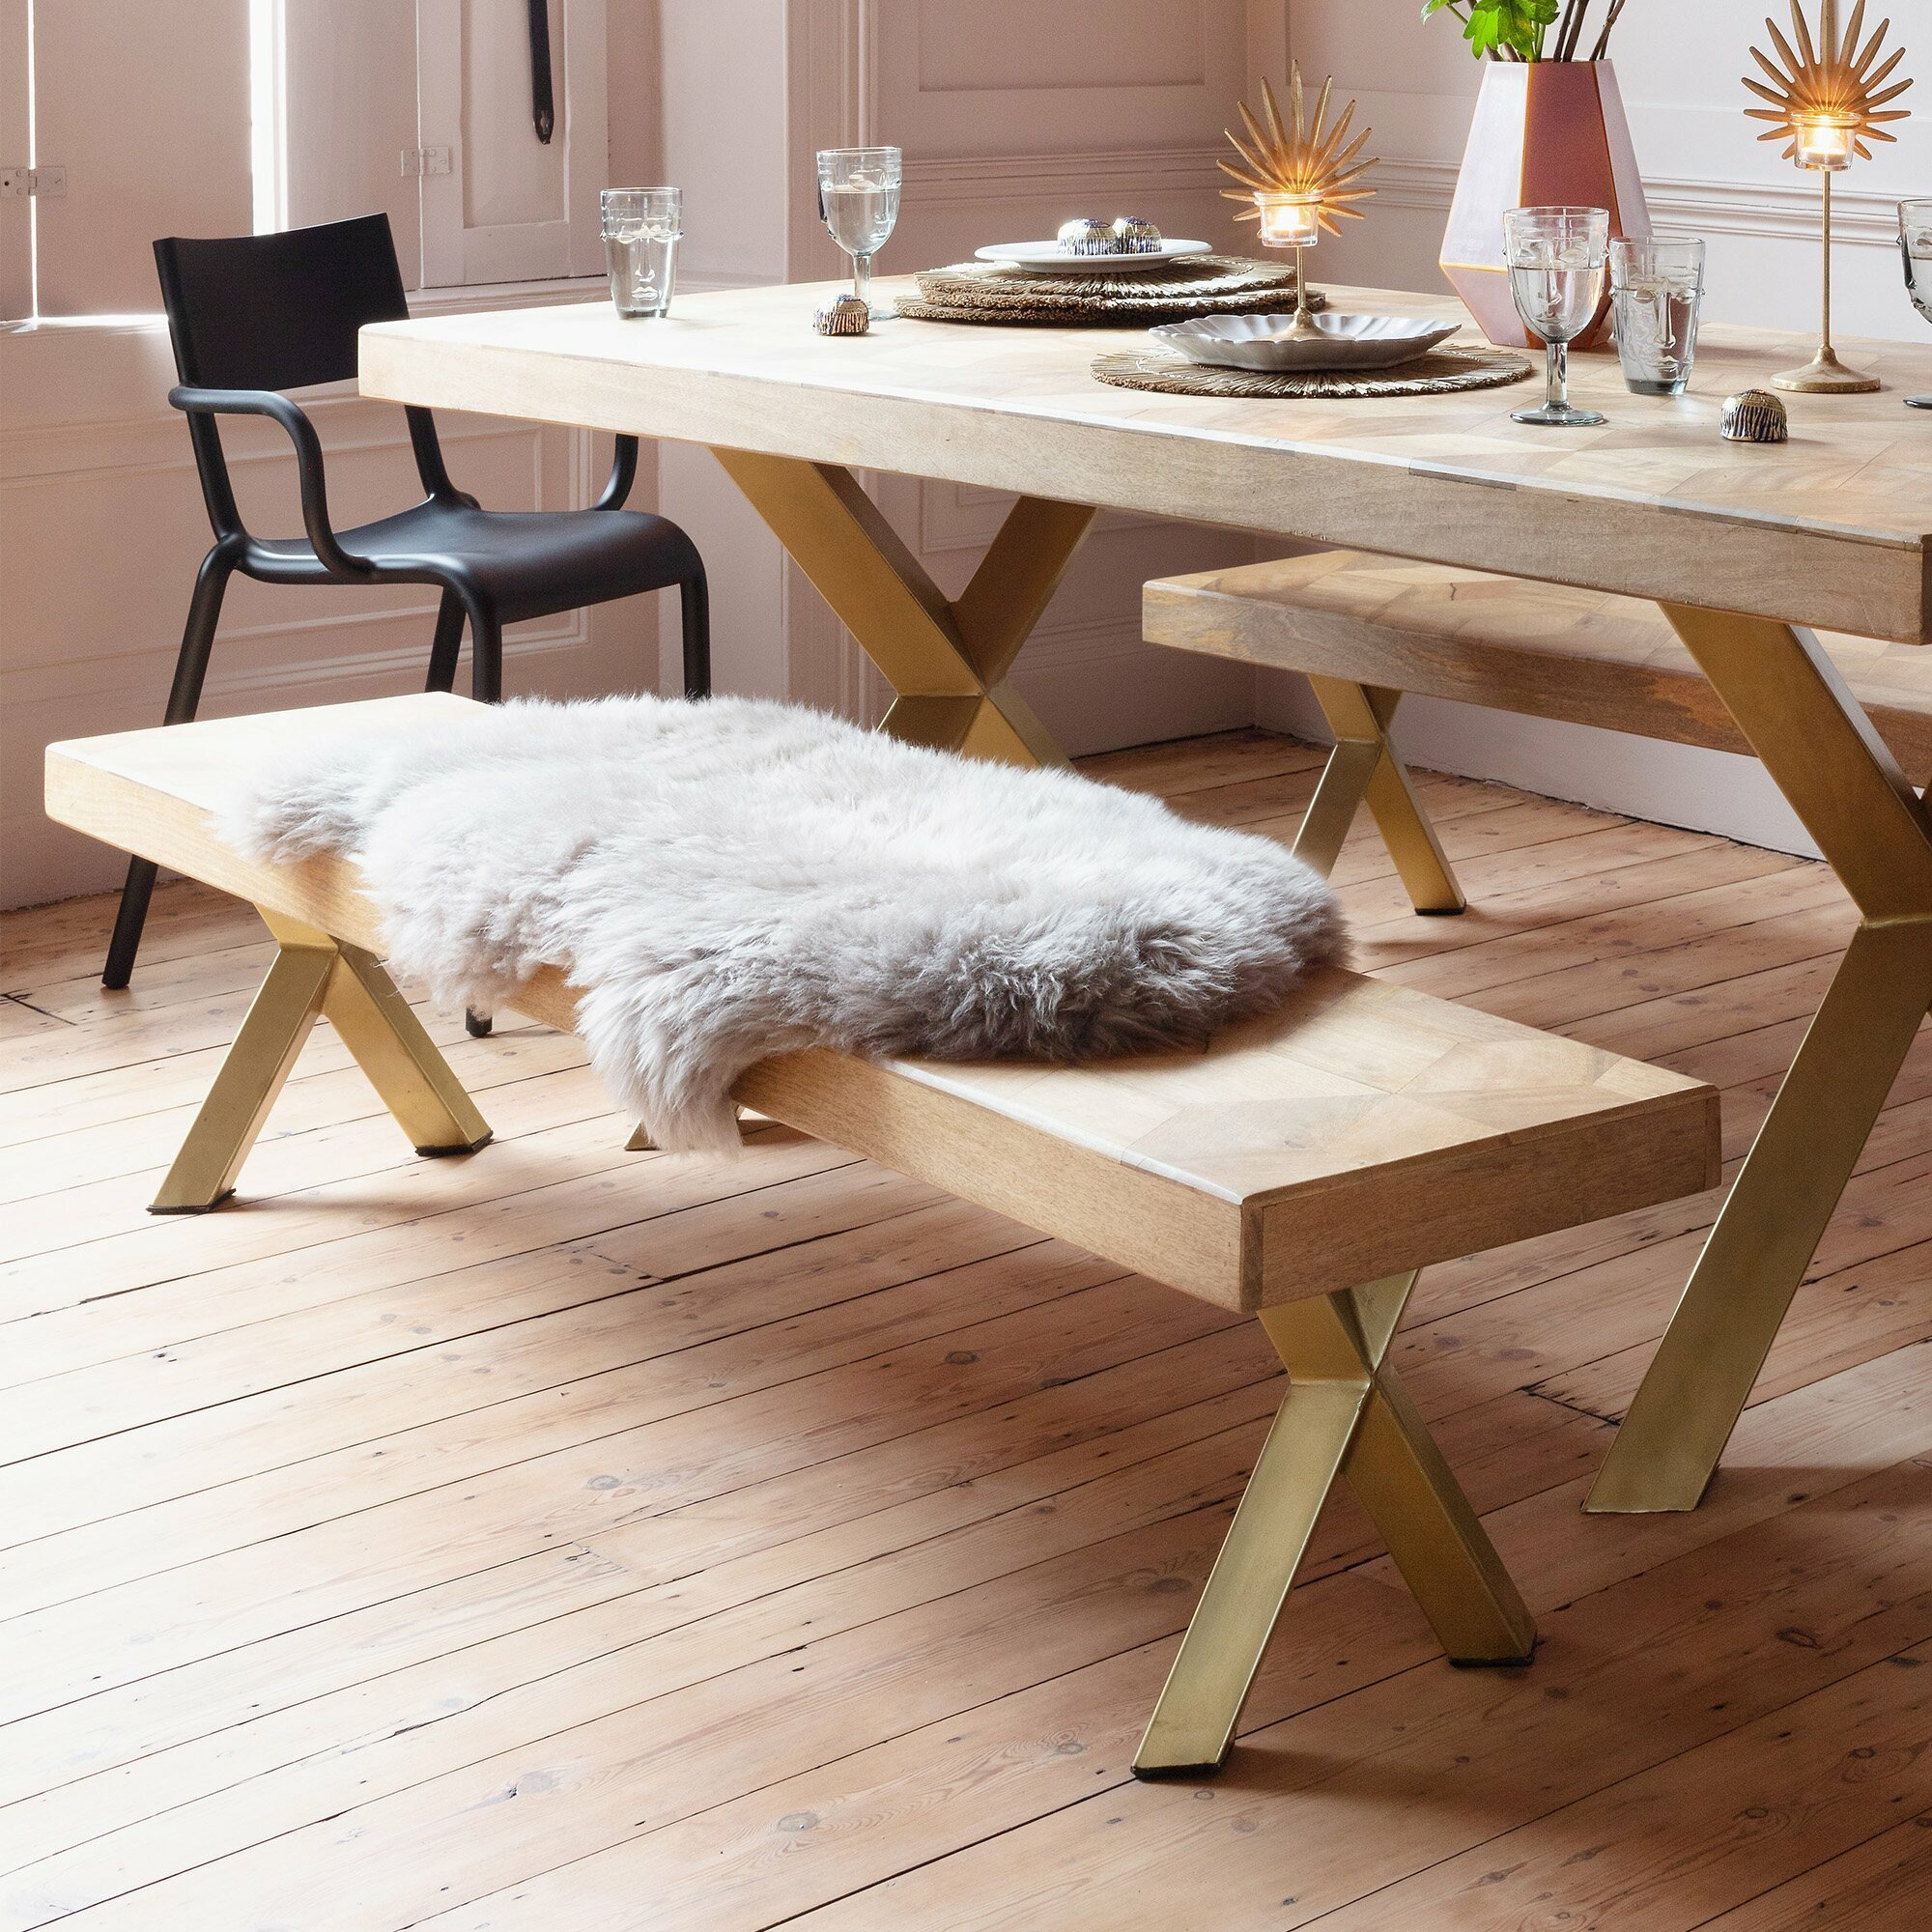 Graham and Green Faye Parquetry Bench - image 1